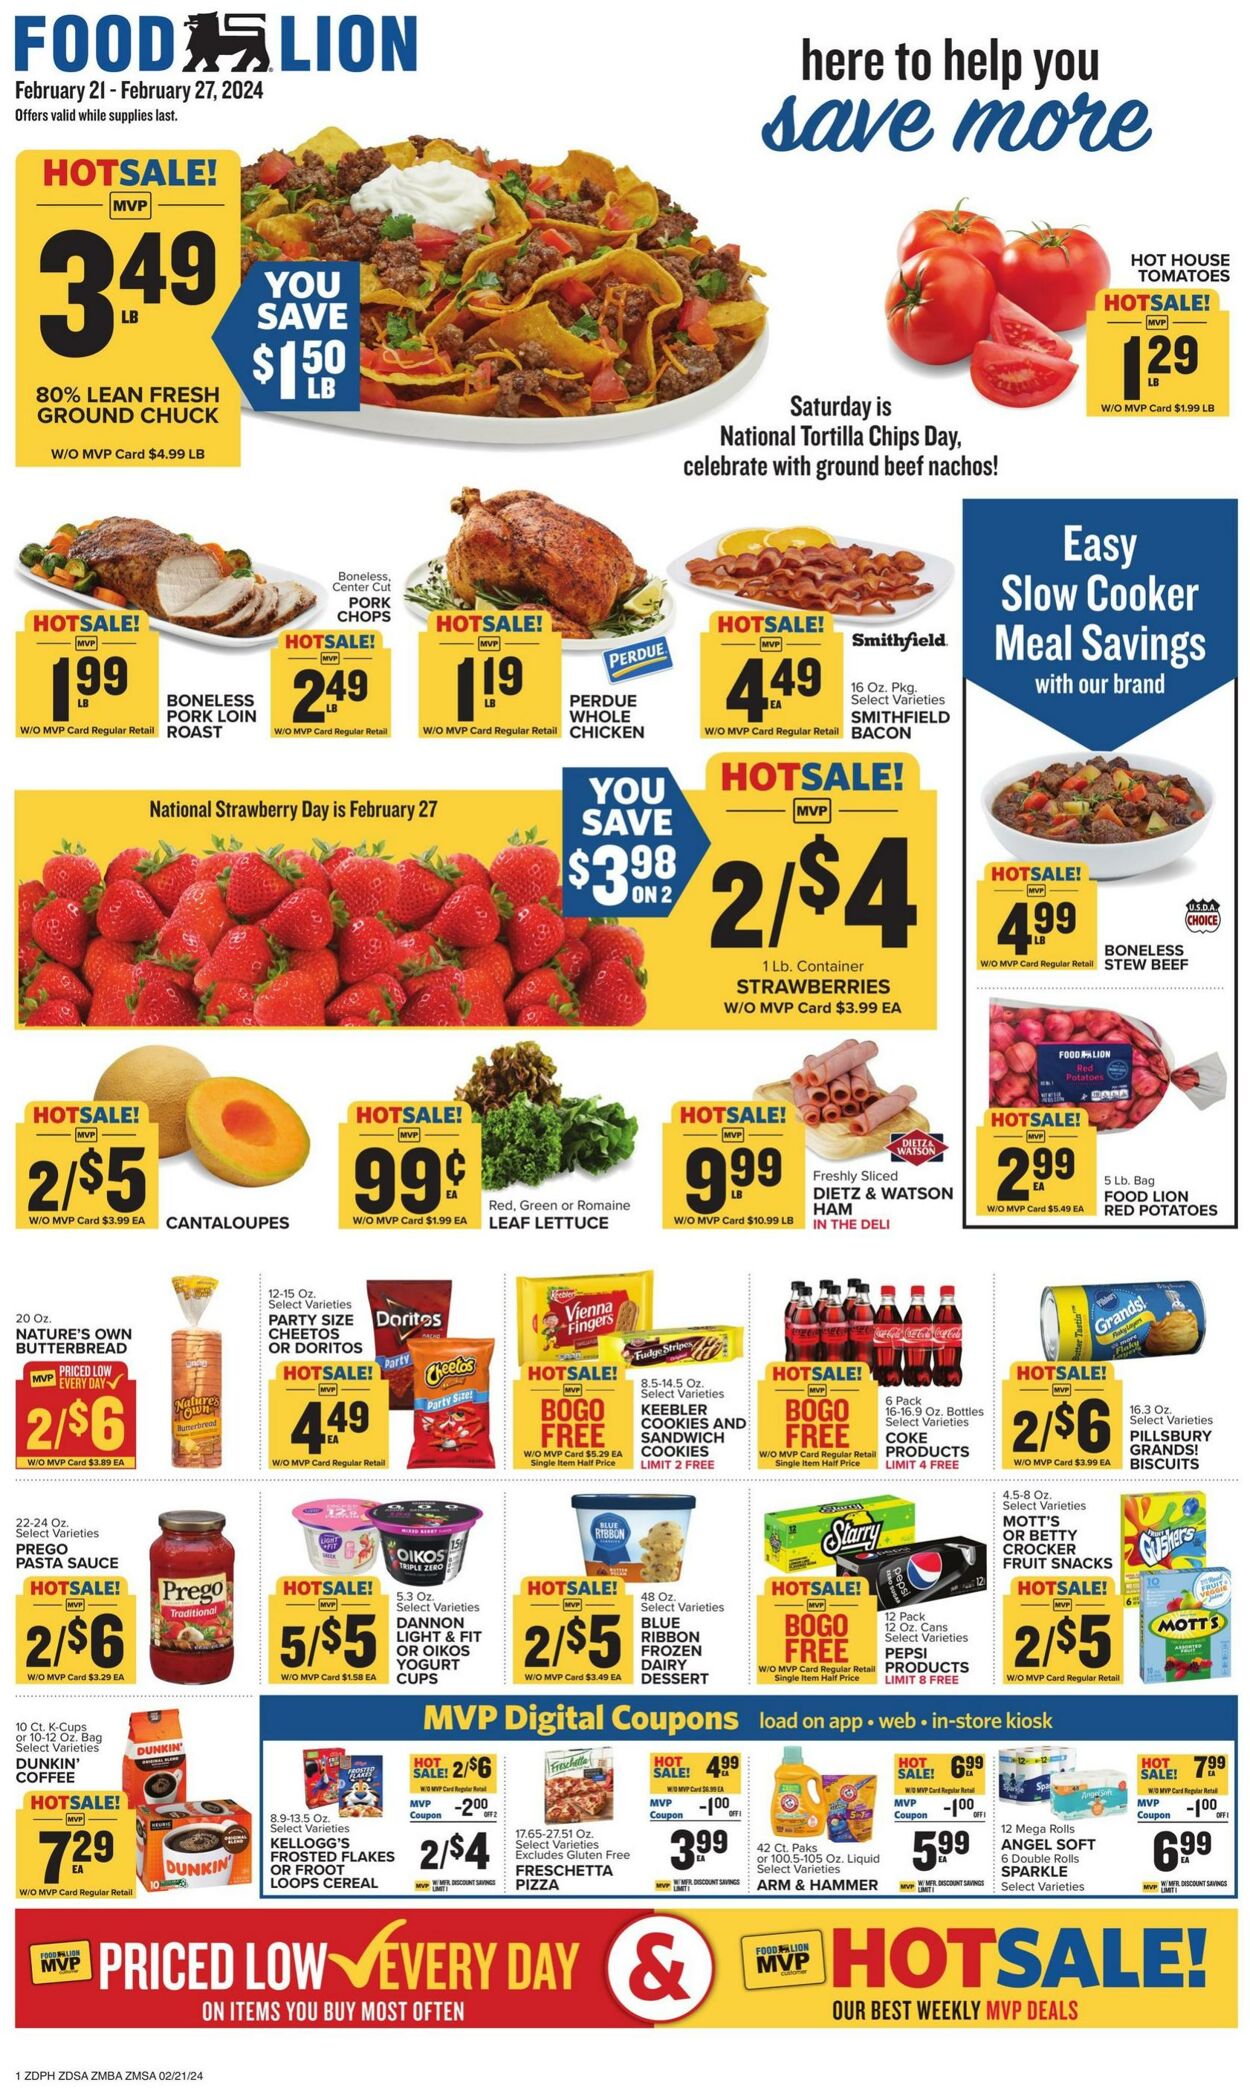 Food Lion Promotional weekly ads